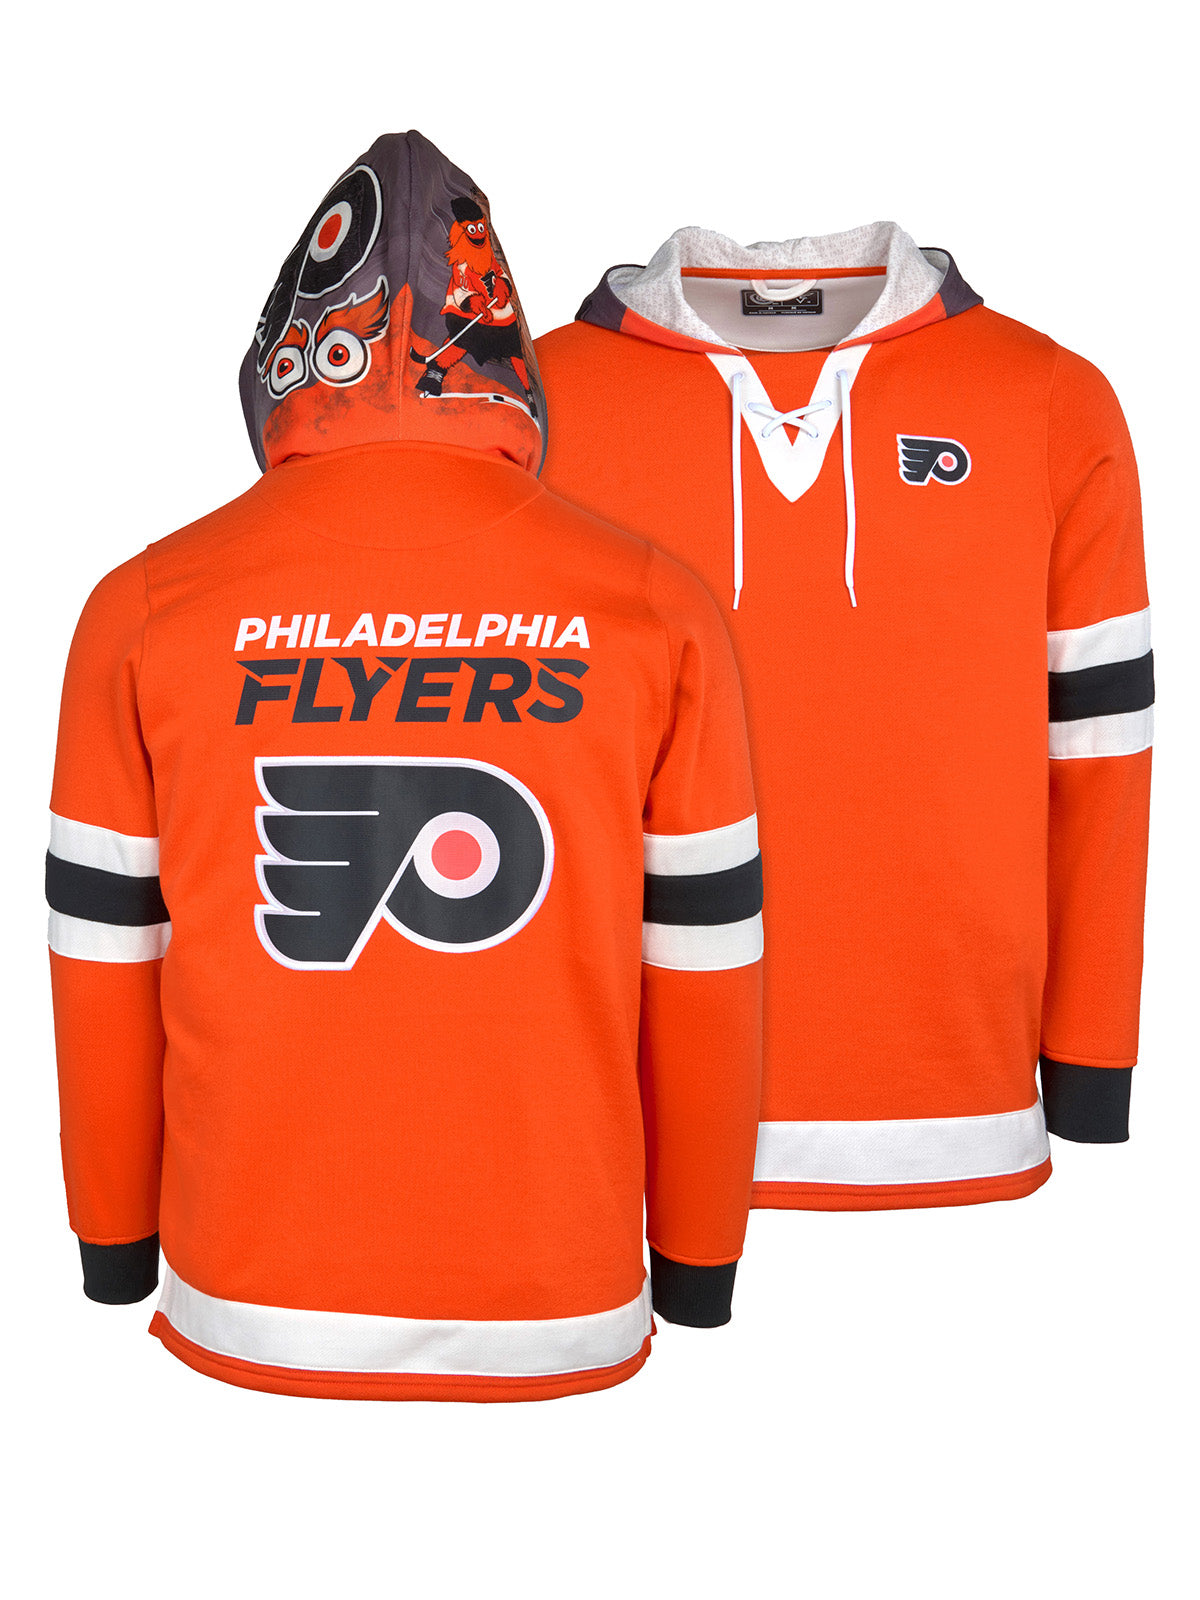 Philadelphia Flyers Lace-Up Hoodie - Hand drawn custom hood designs with all the team colors and craftmanship to replicate the gameday jersey of this NHL hoodie